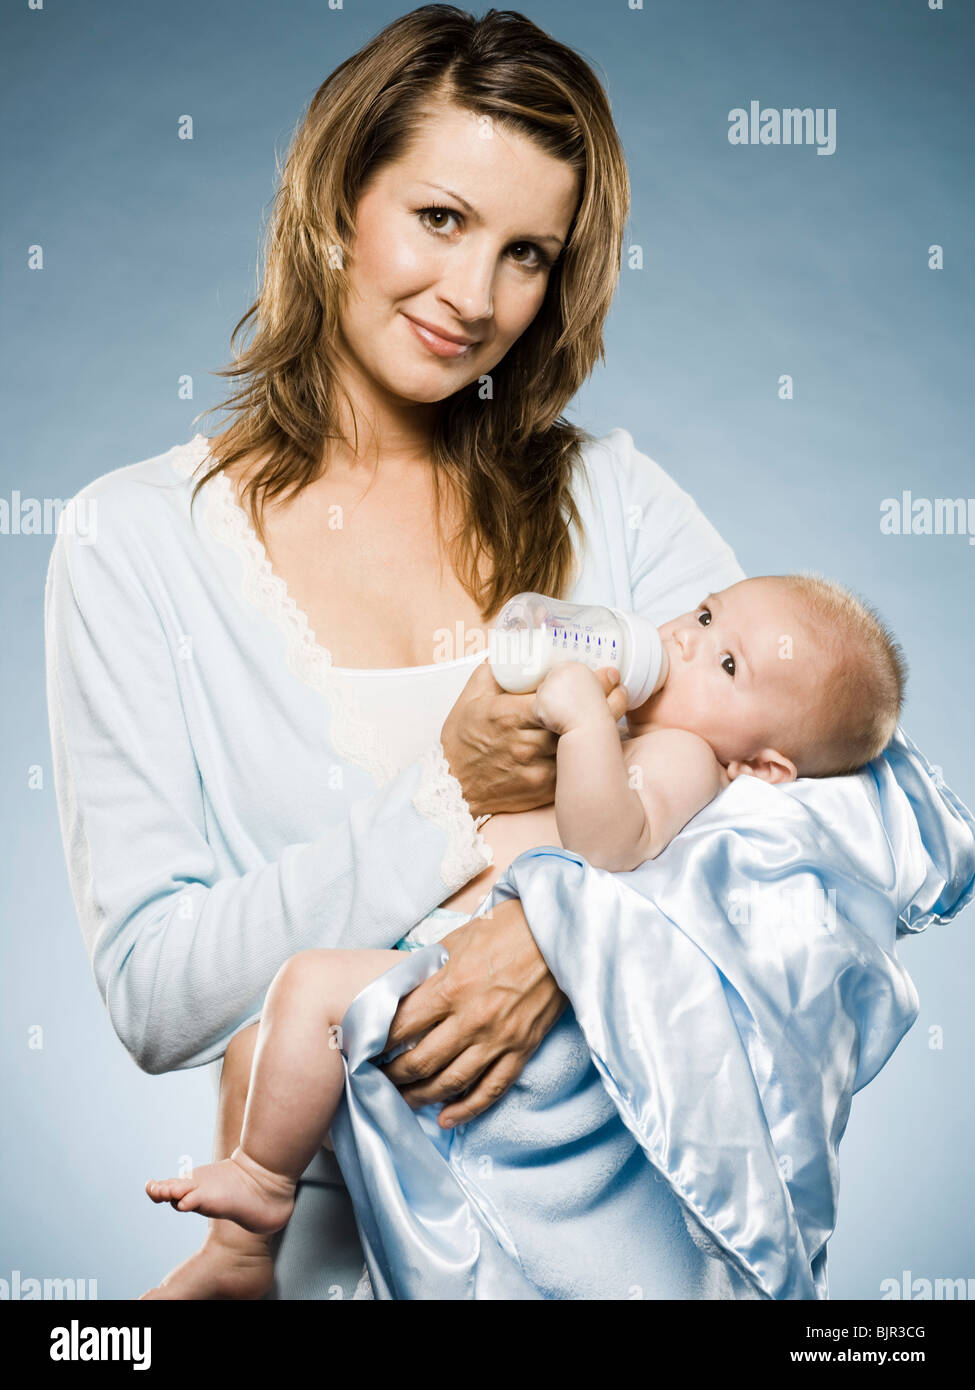 Woman and baby. Stock Photo